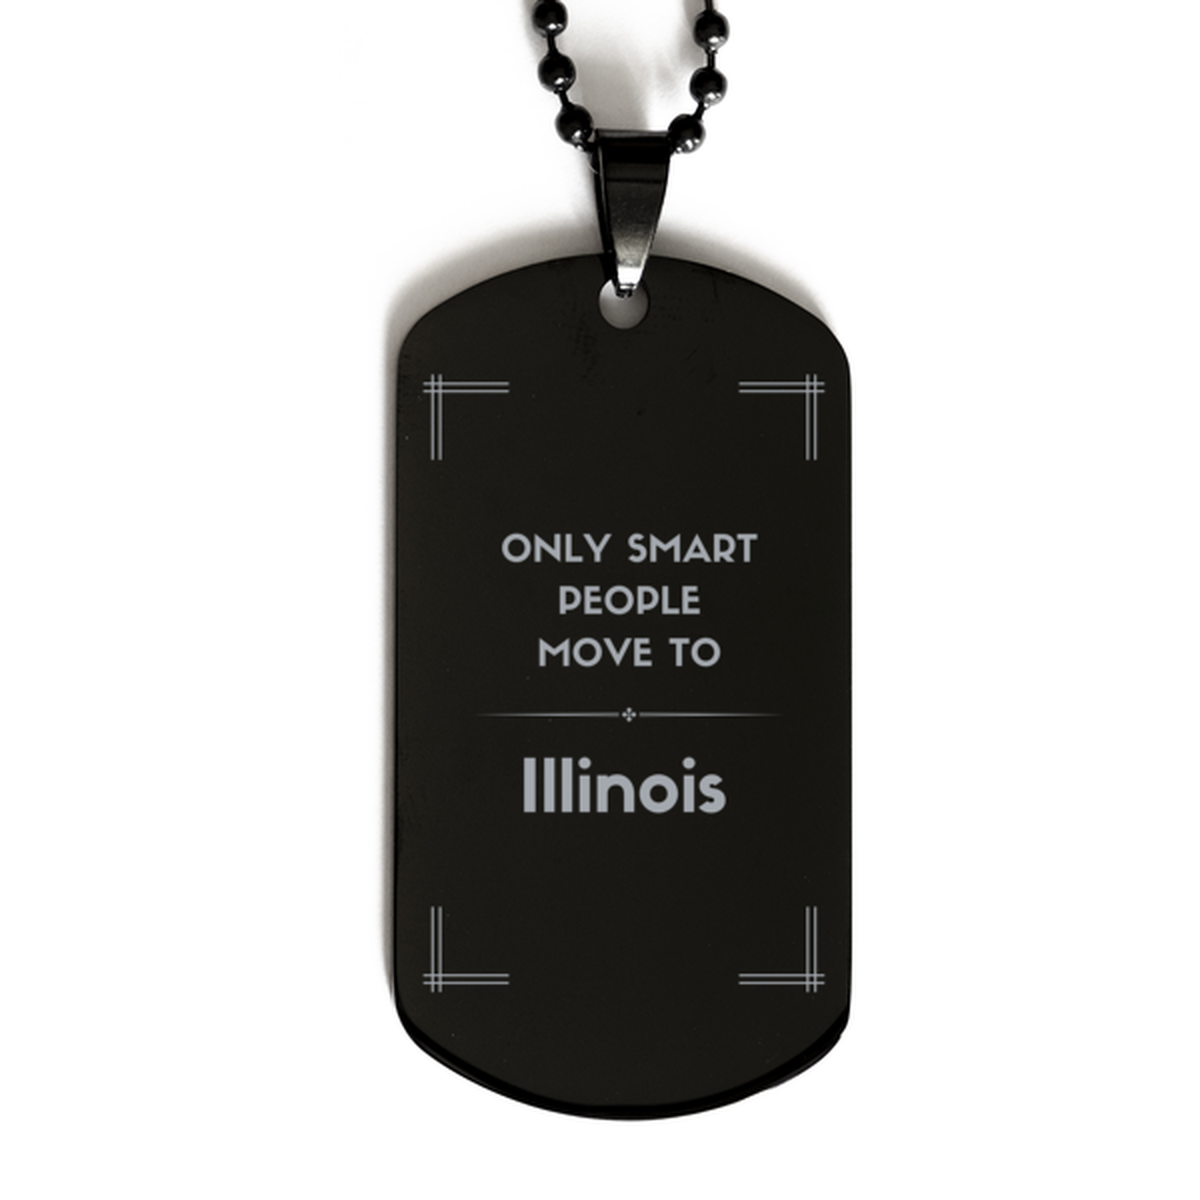 Only smart people move to Illinois Black Dog Tag, Gag Gifts For Illinois, Move to Illinois Gifts for Friends Coworker Funny Saying Quote